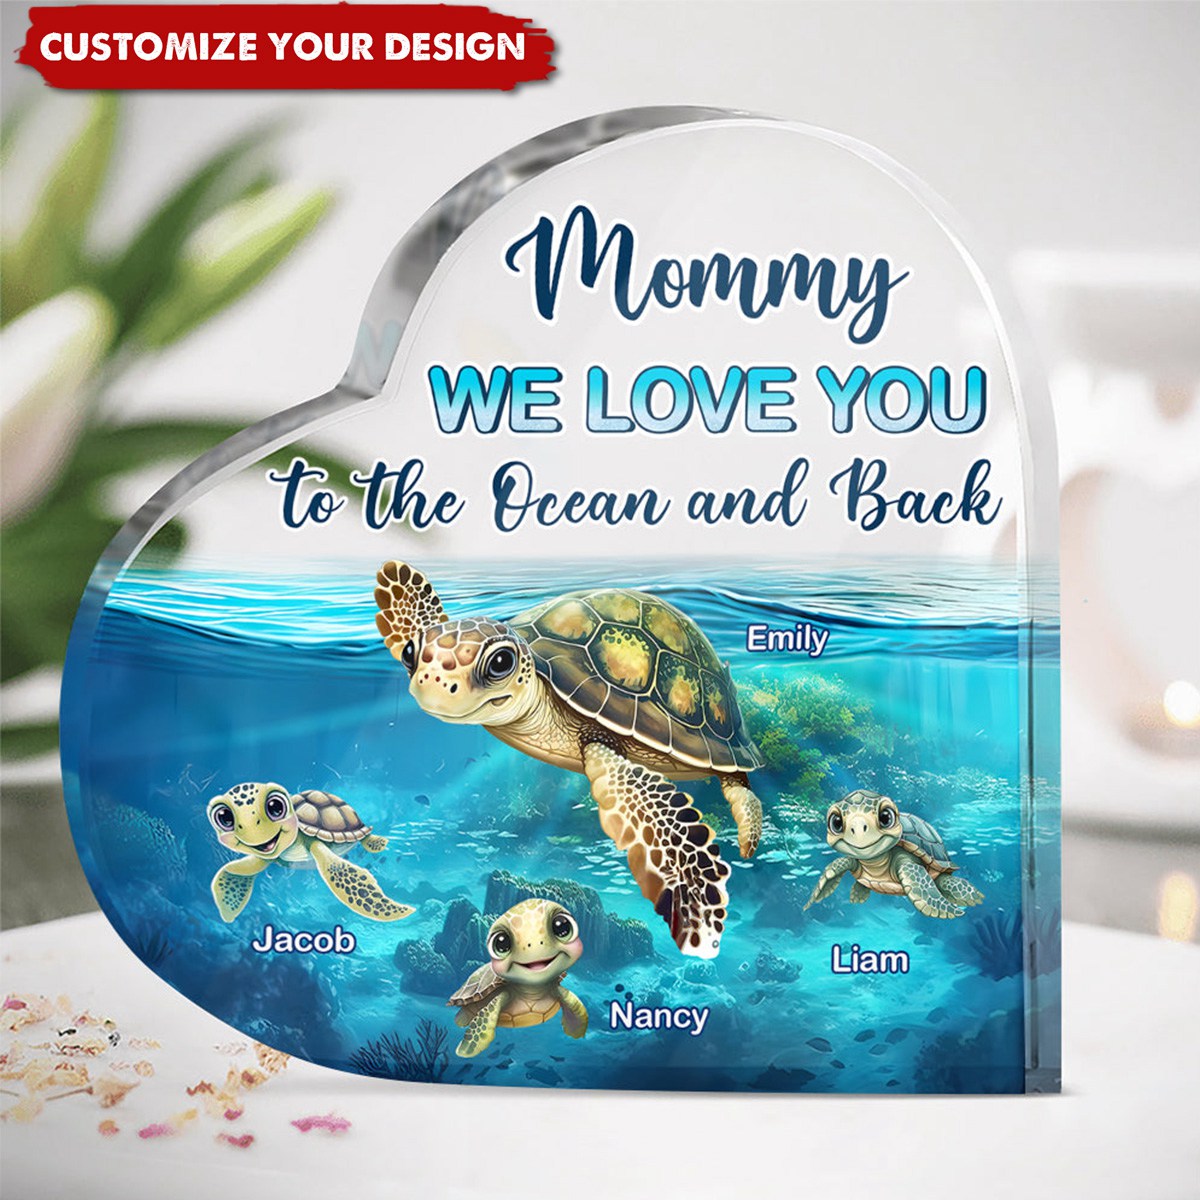 We Love You To The Ocean And Back- Personalized Gifts For Mom/Grandma Heart Plaque